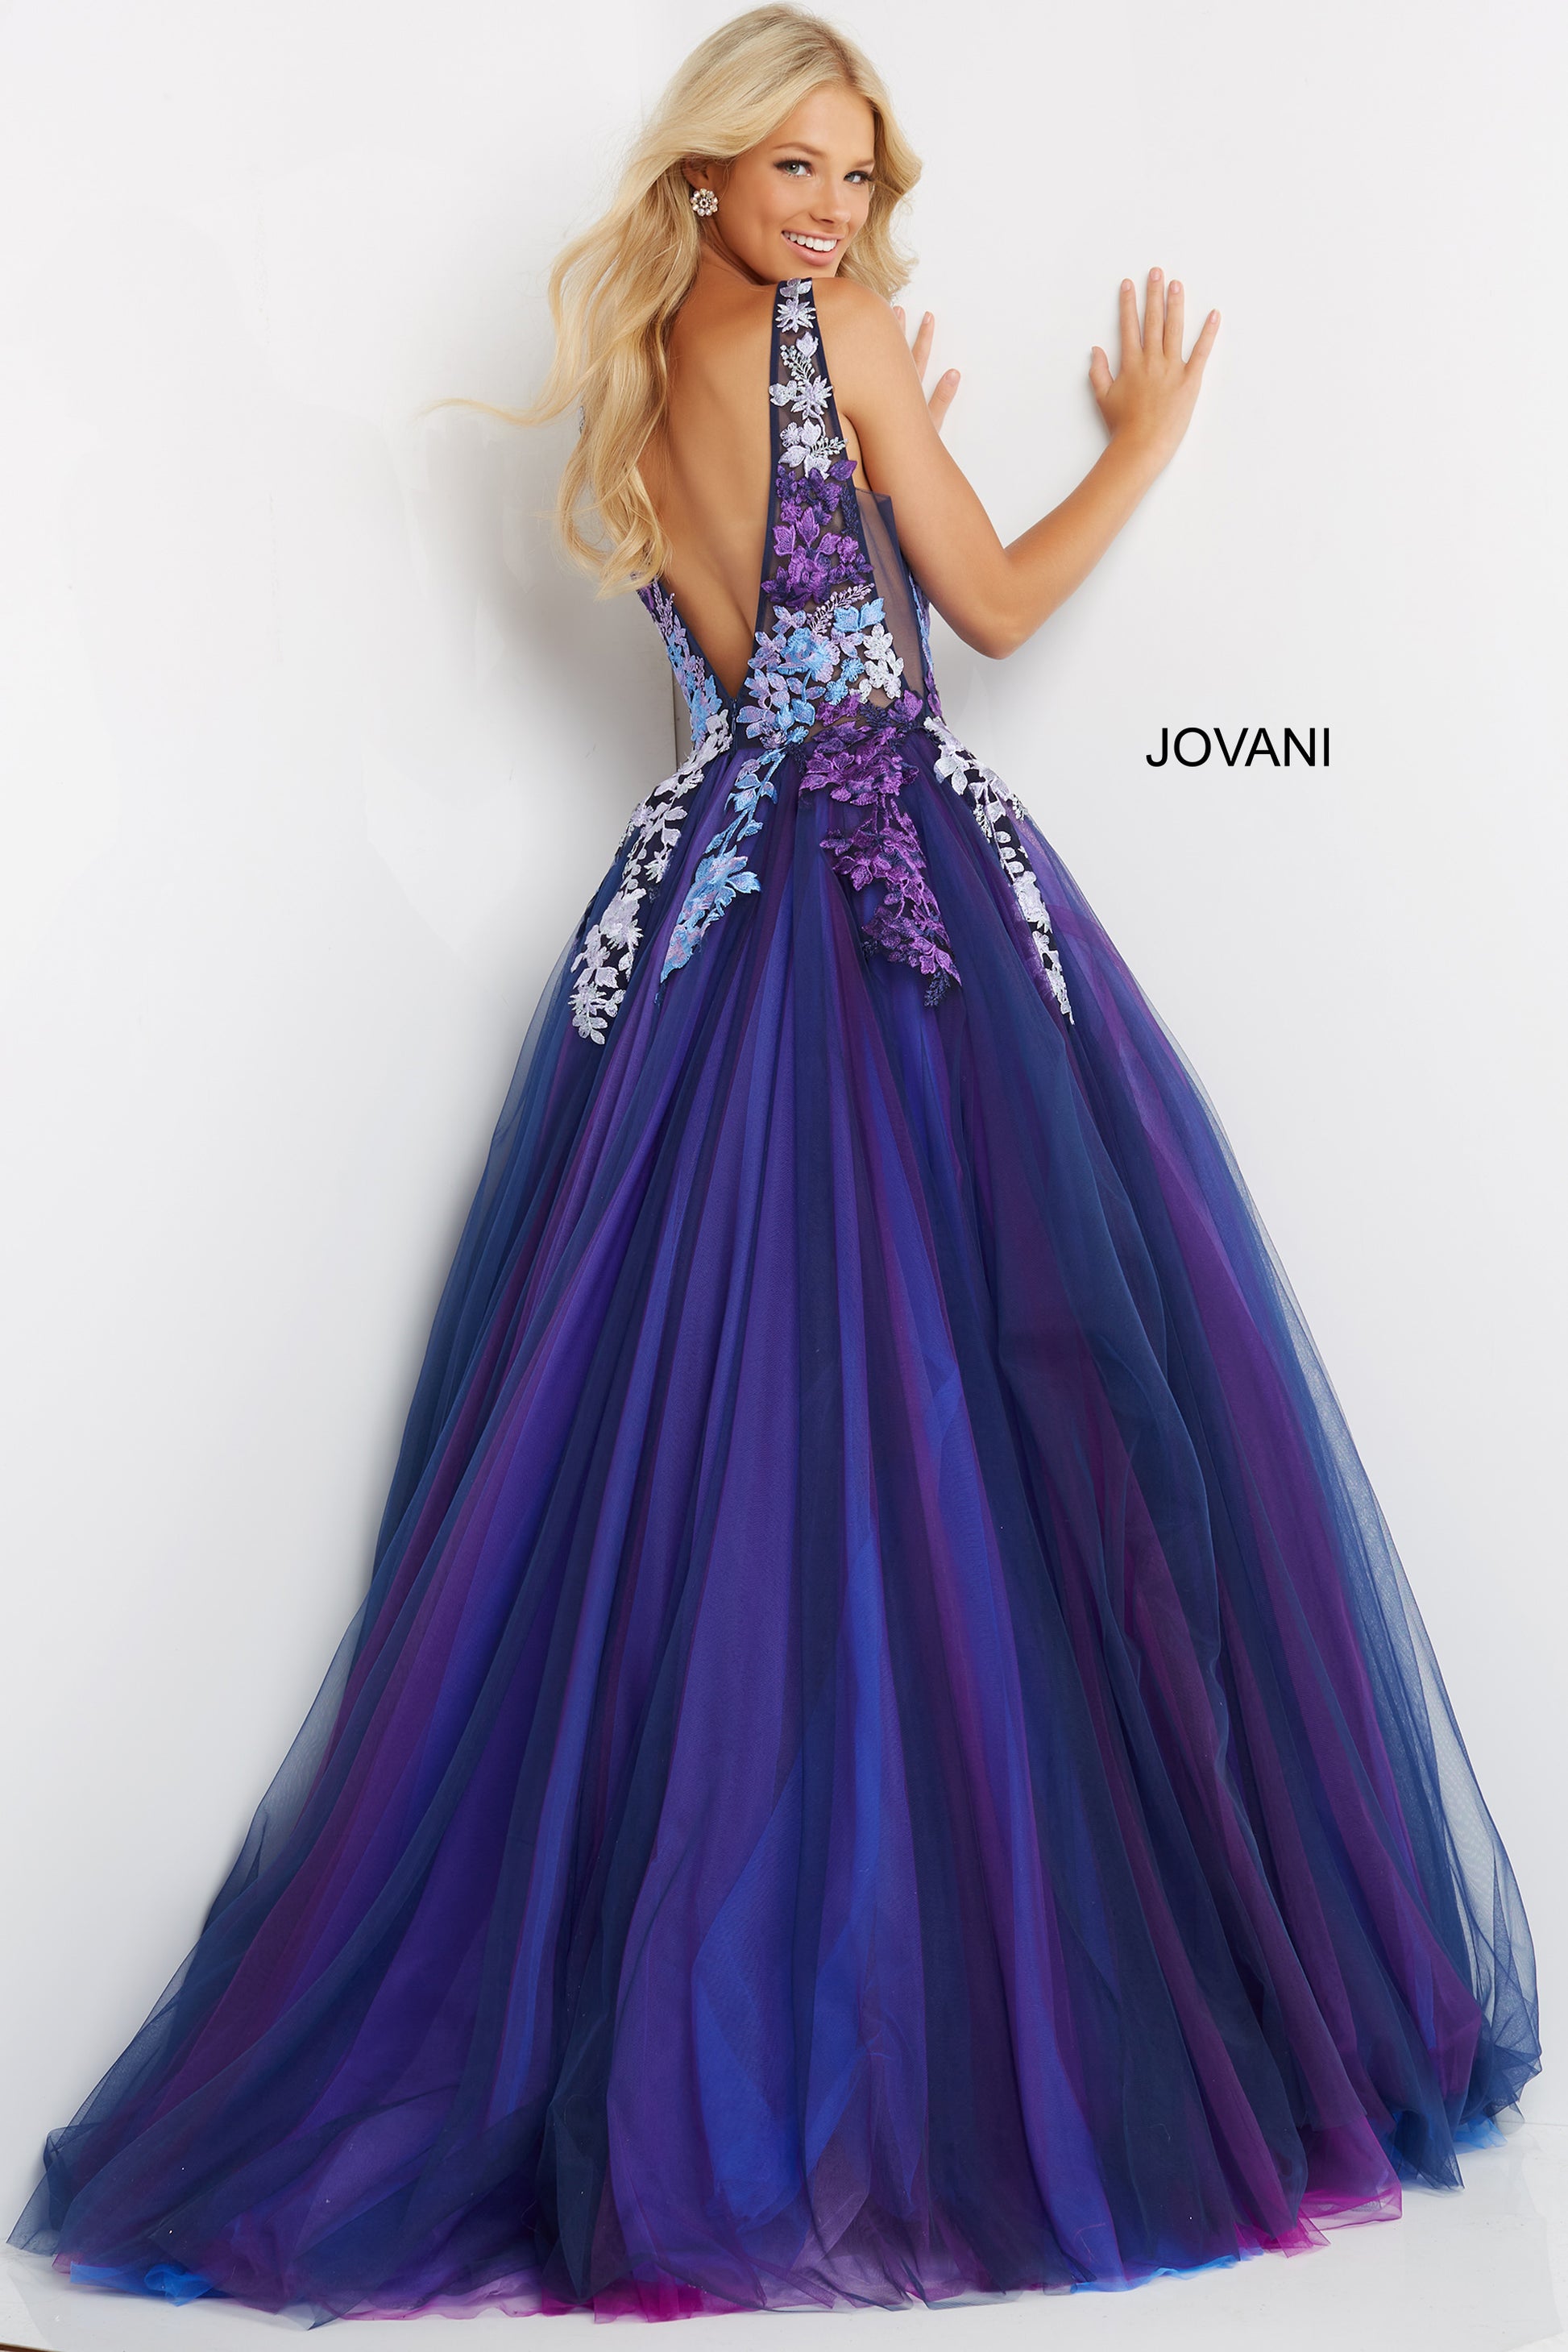 Jovani 06807 Navy Multi Long Ballgown Prom Dress. Floor length navy multi Jovani prom ballgown 06807 features floral embroidered sleeveless bodice with plunging V neck and open back.